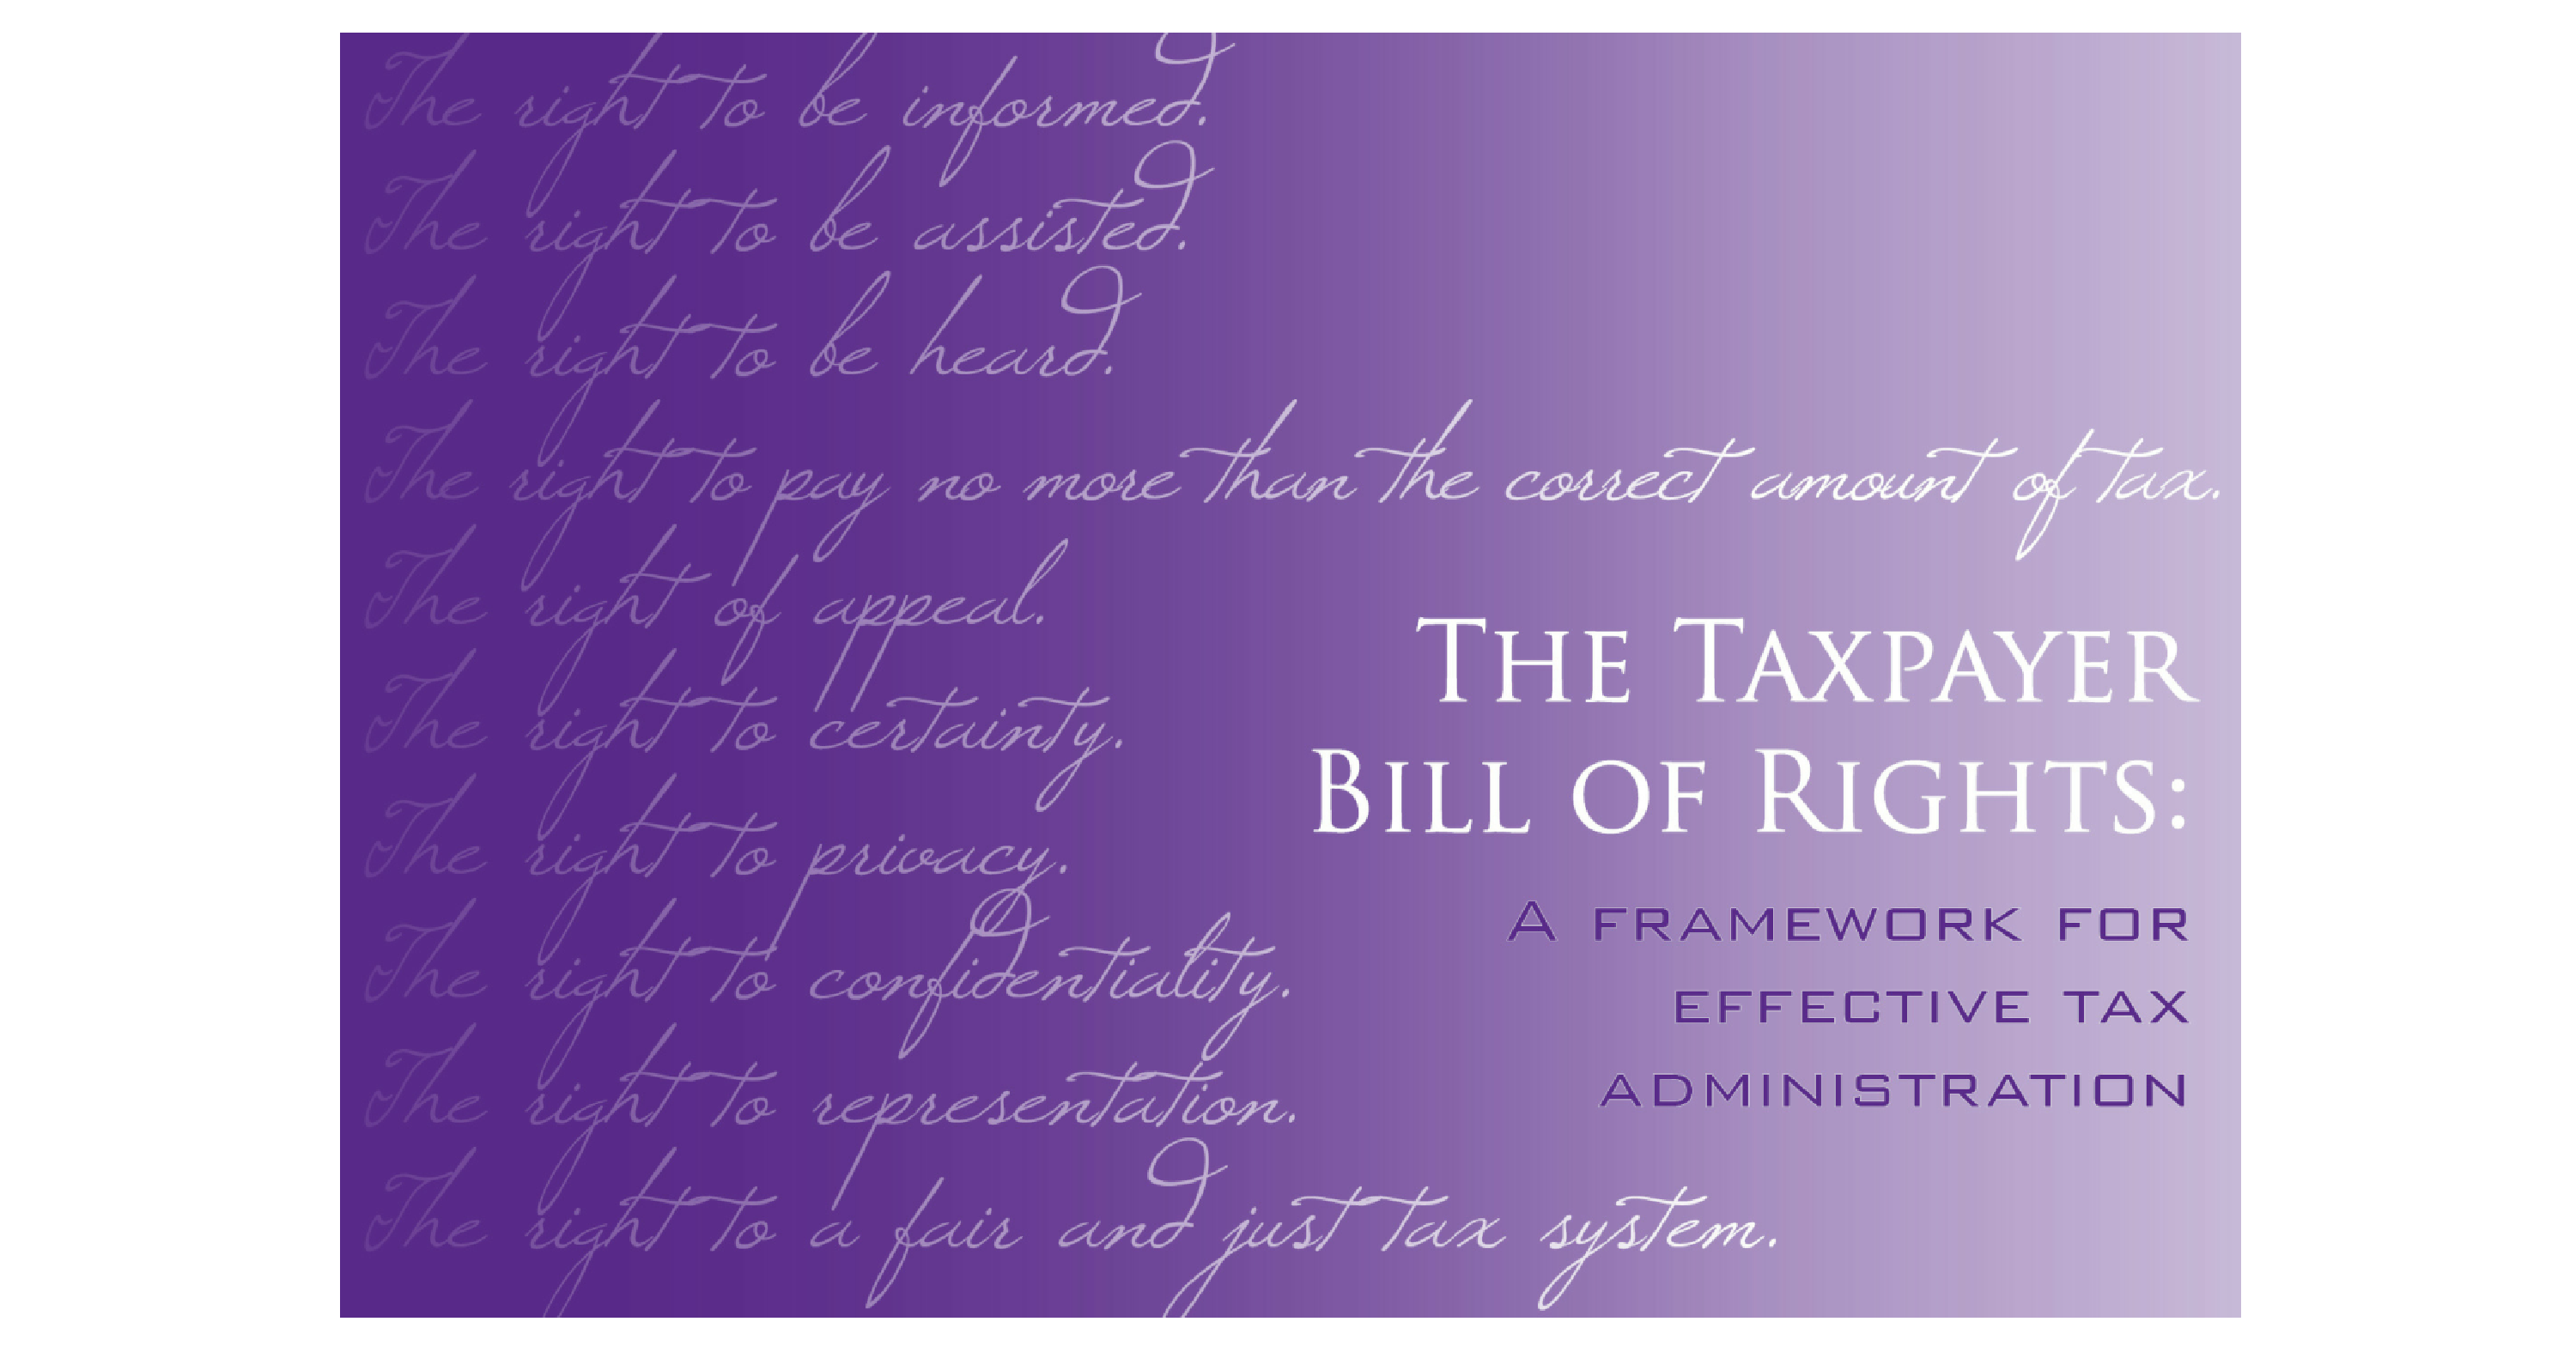 If You’re Dealing with the IRS, Don’t Forget Your Taxpayer Bill of Rights